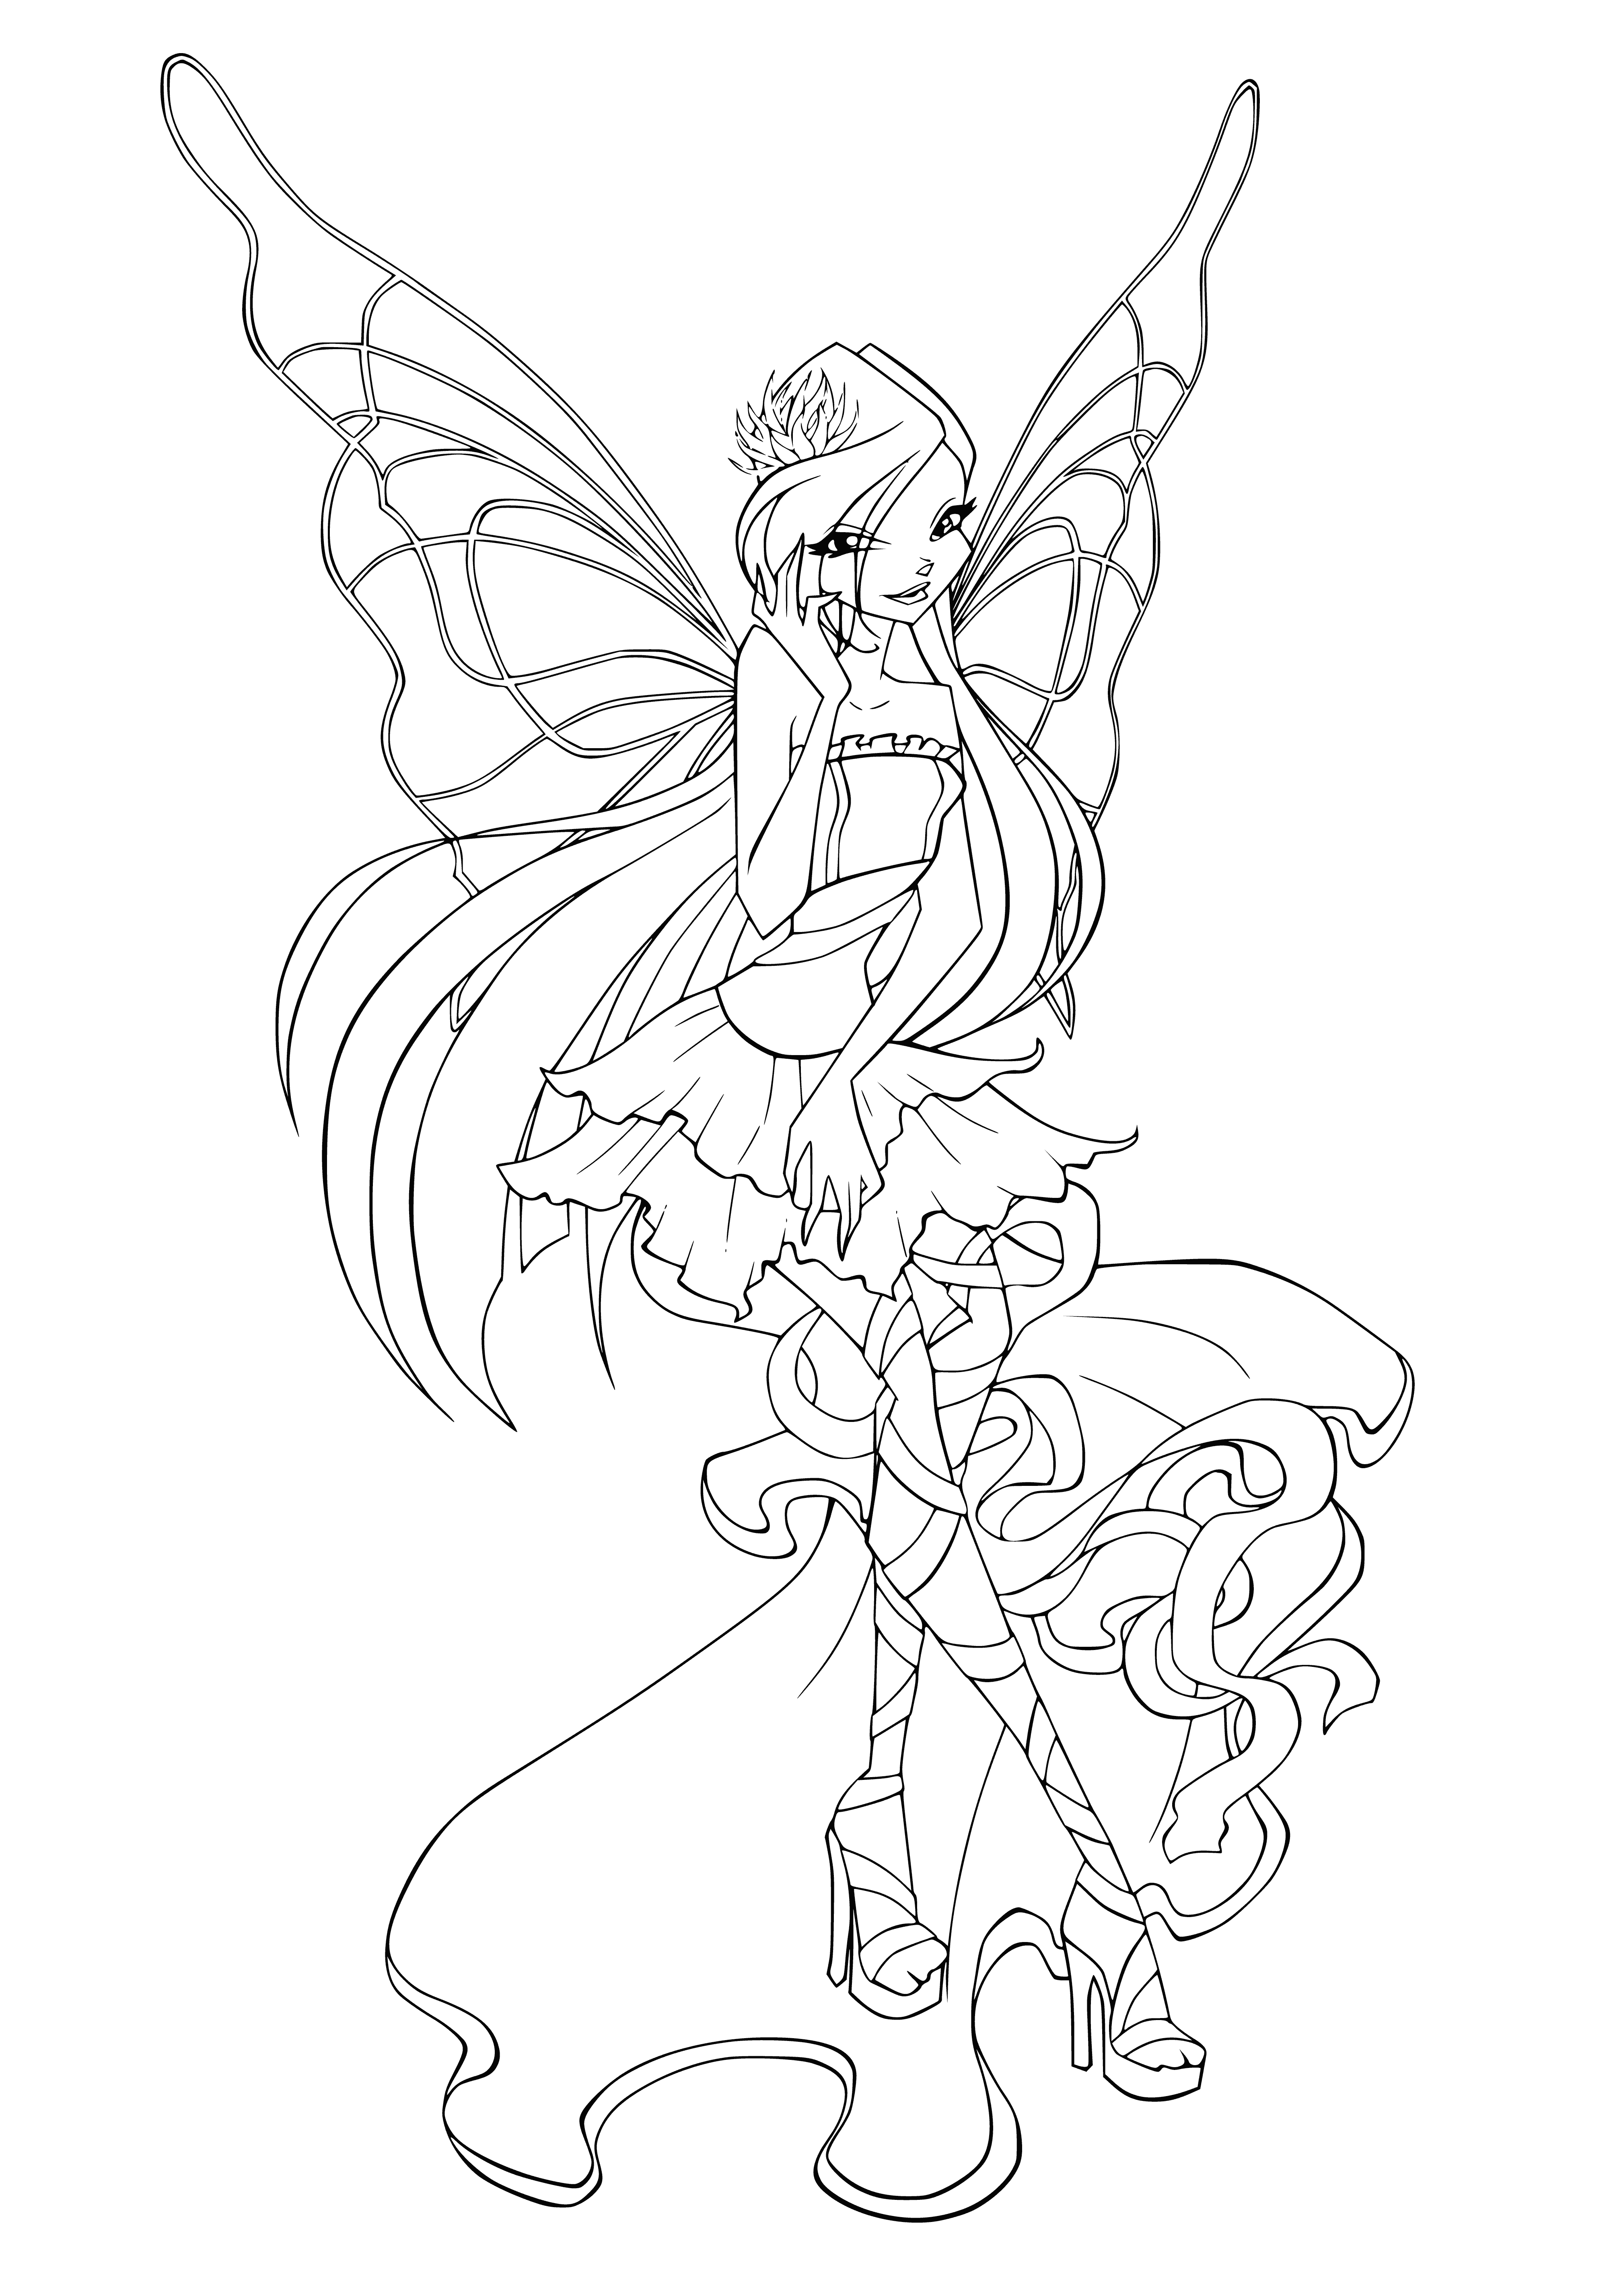 coloring page: A muse in white dress with serious expression, arms at sides and eyes closed, wearing a black belt.